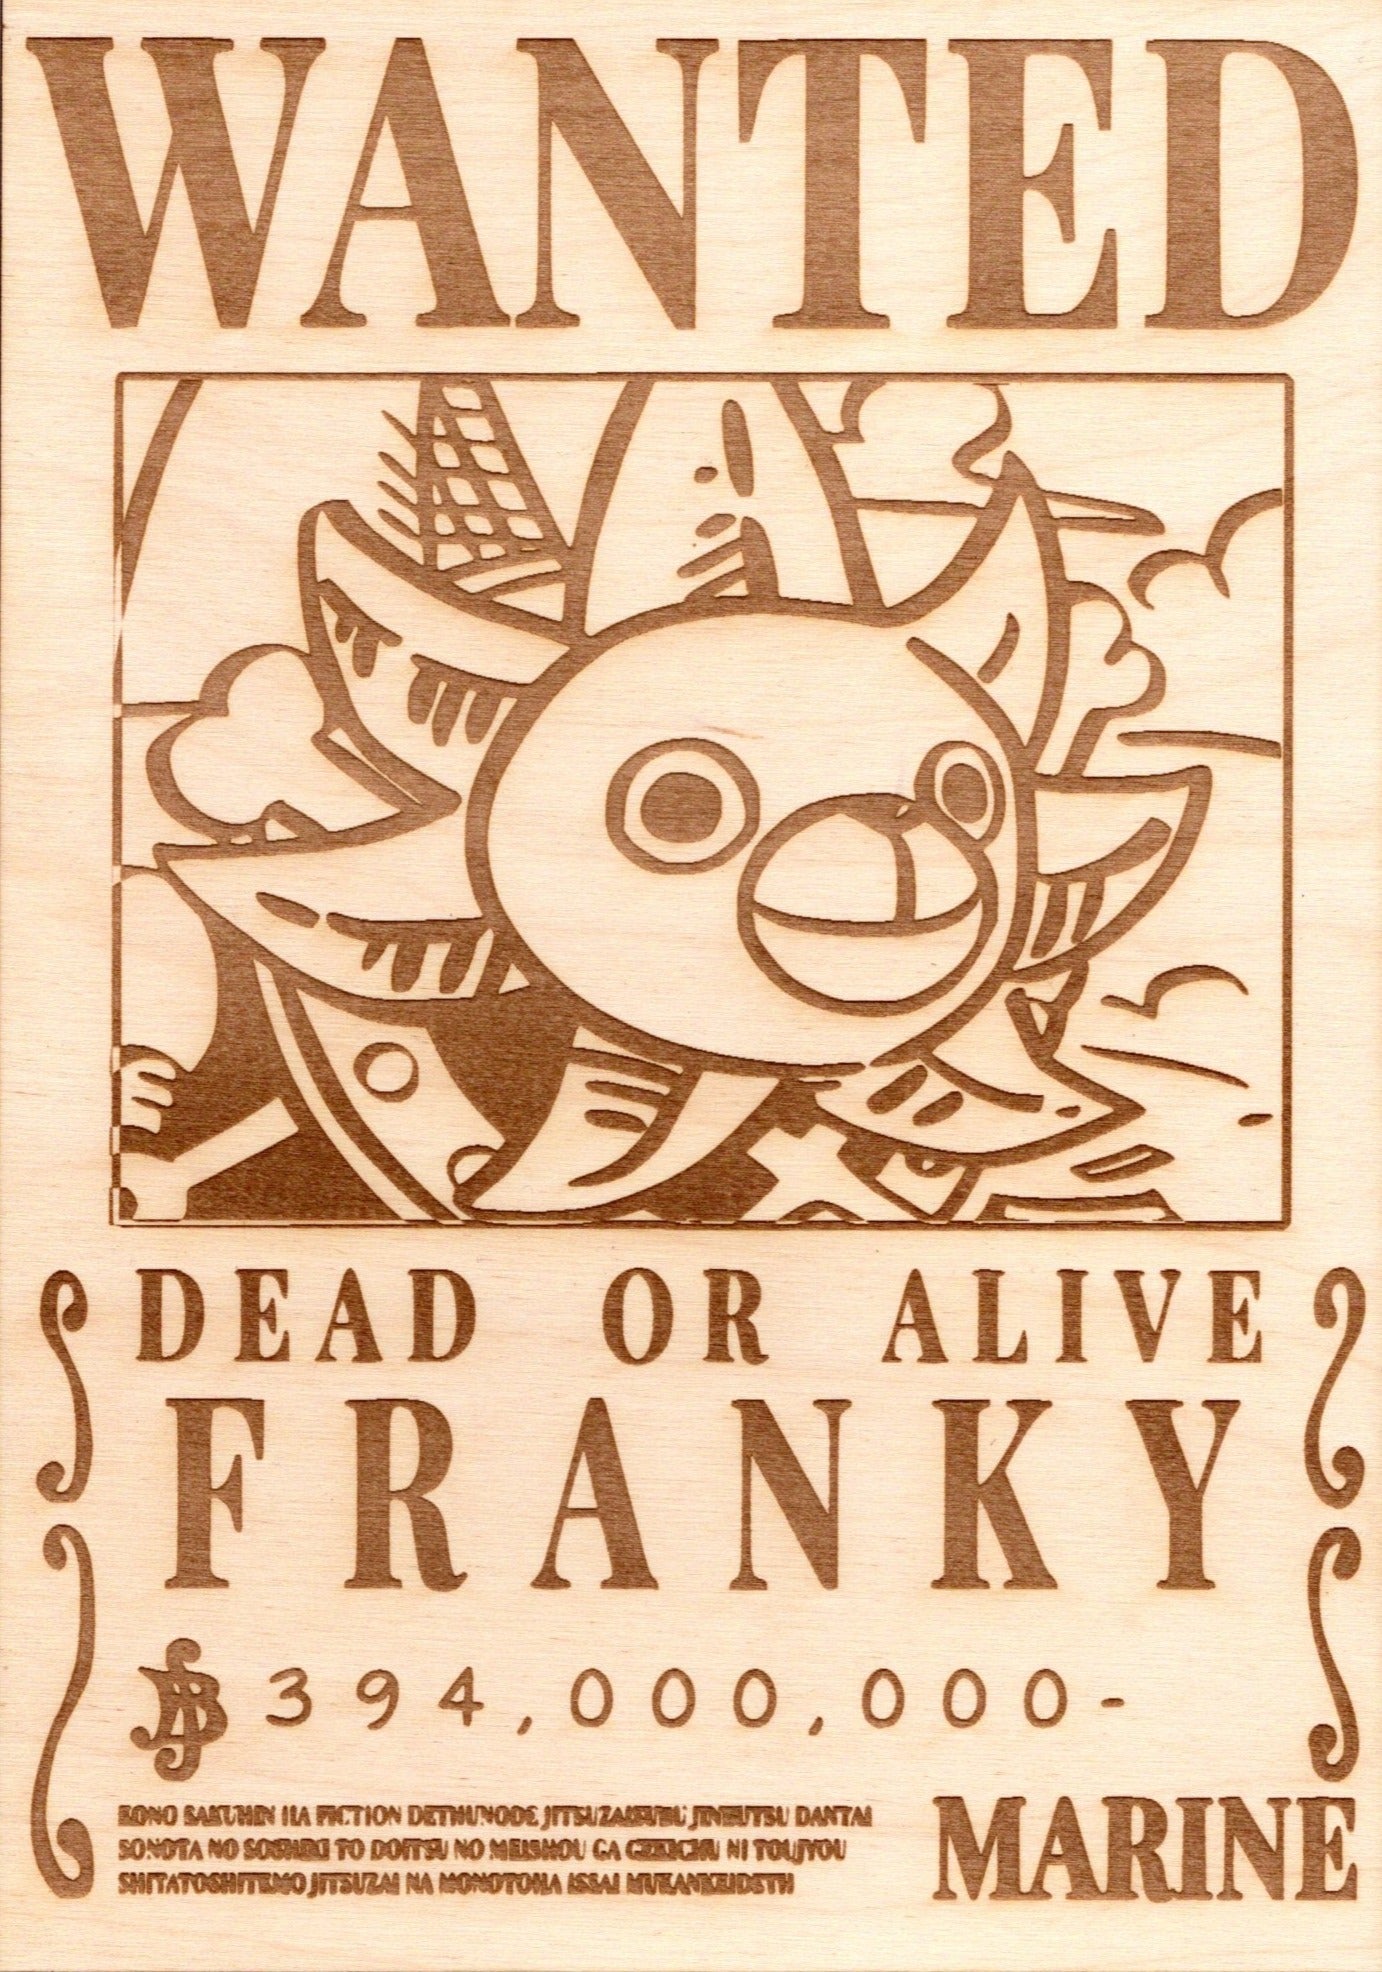 one piece wanted posters chopper